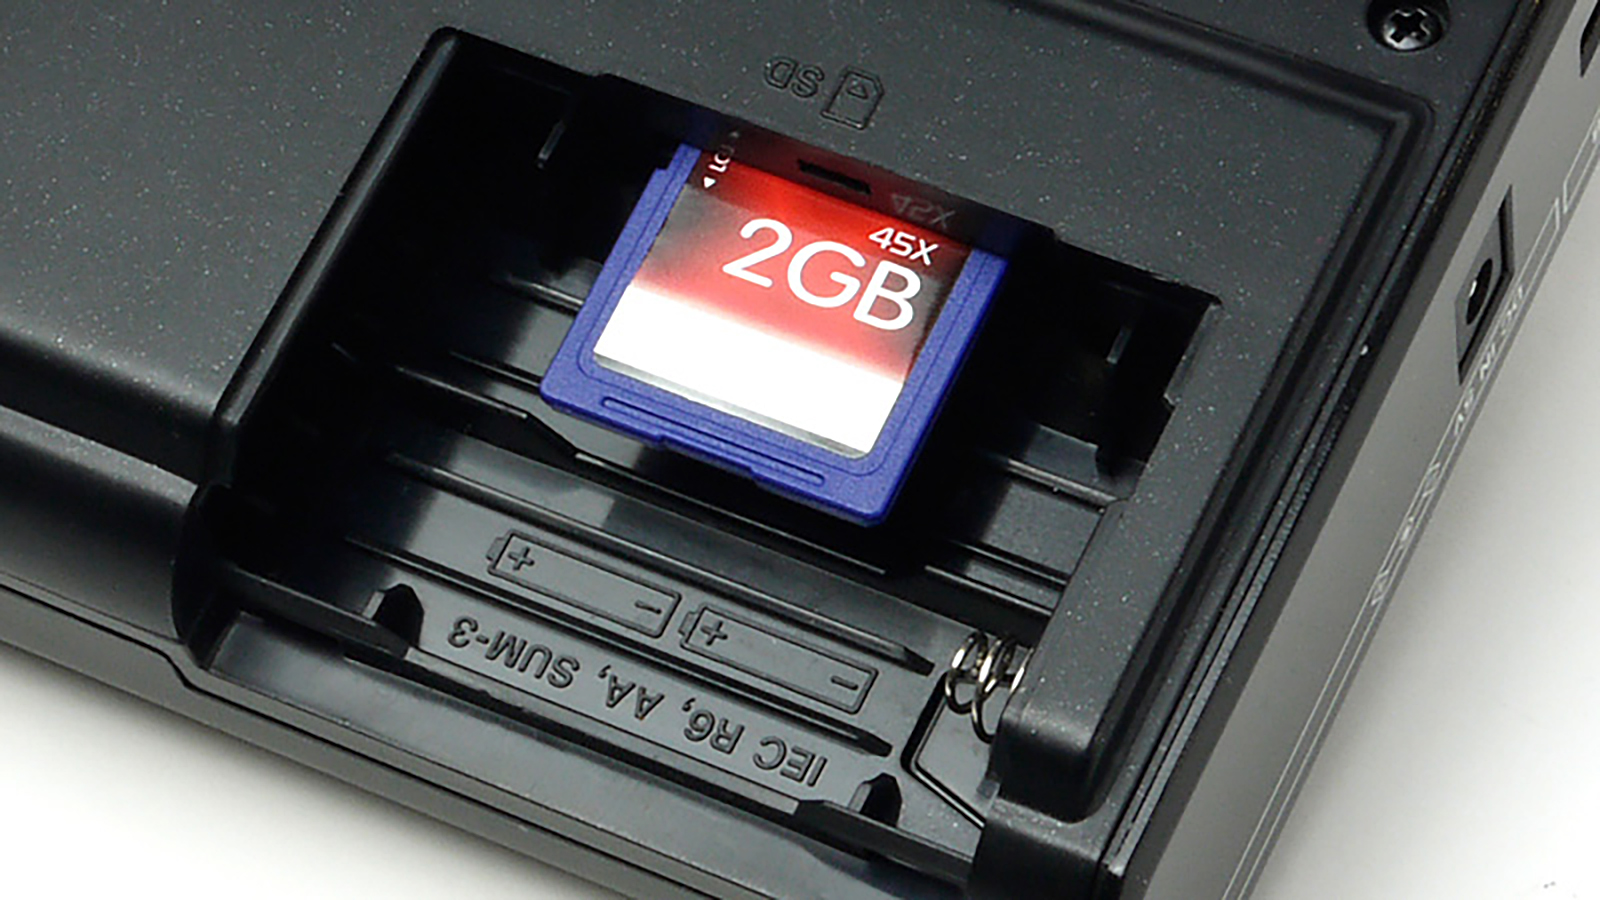 Record to SD/SDHC Card (up to 32GB) With High-Speed Data Transfer via USB2.0